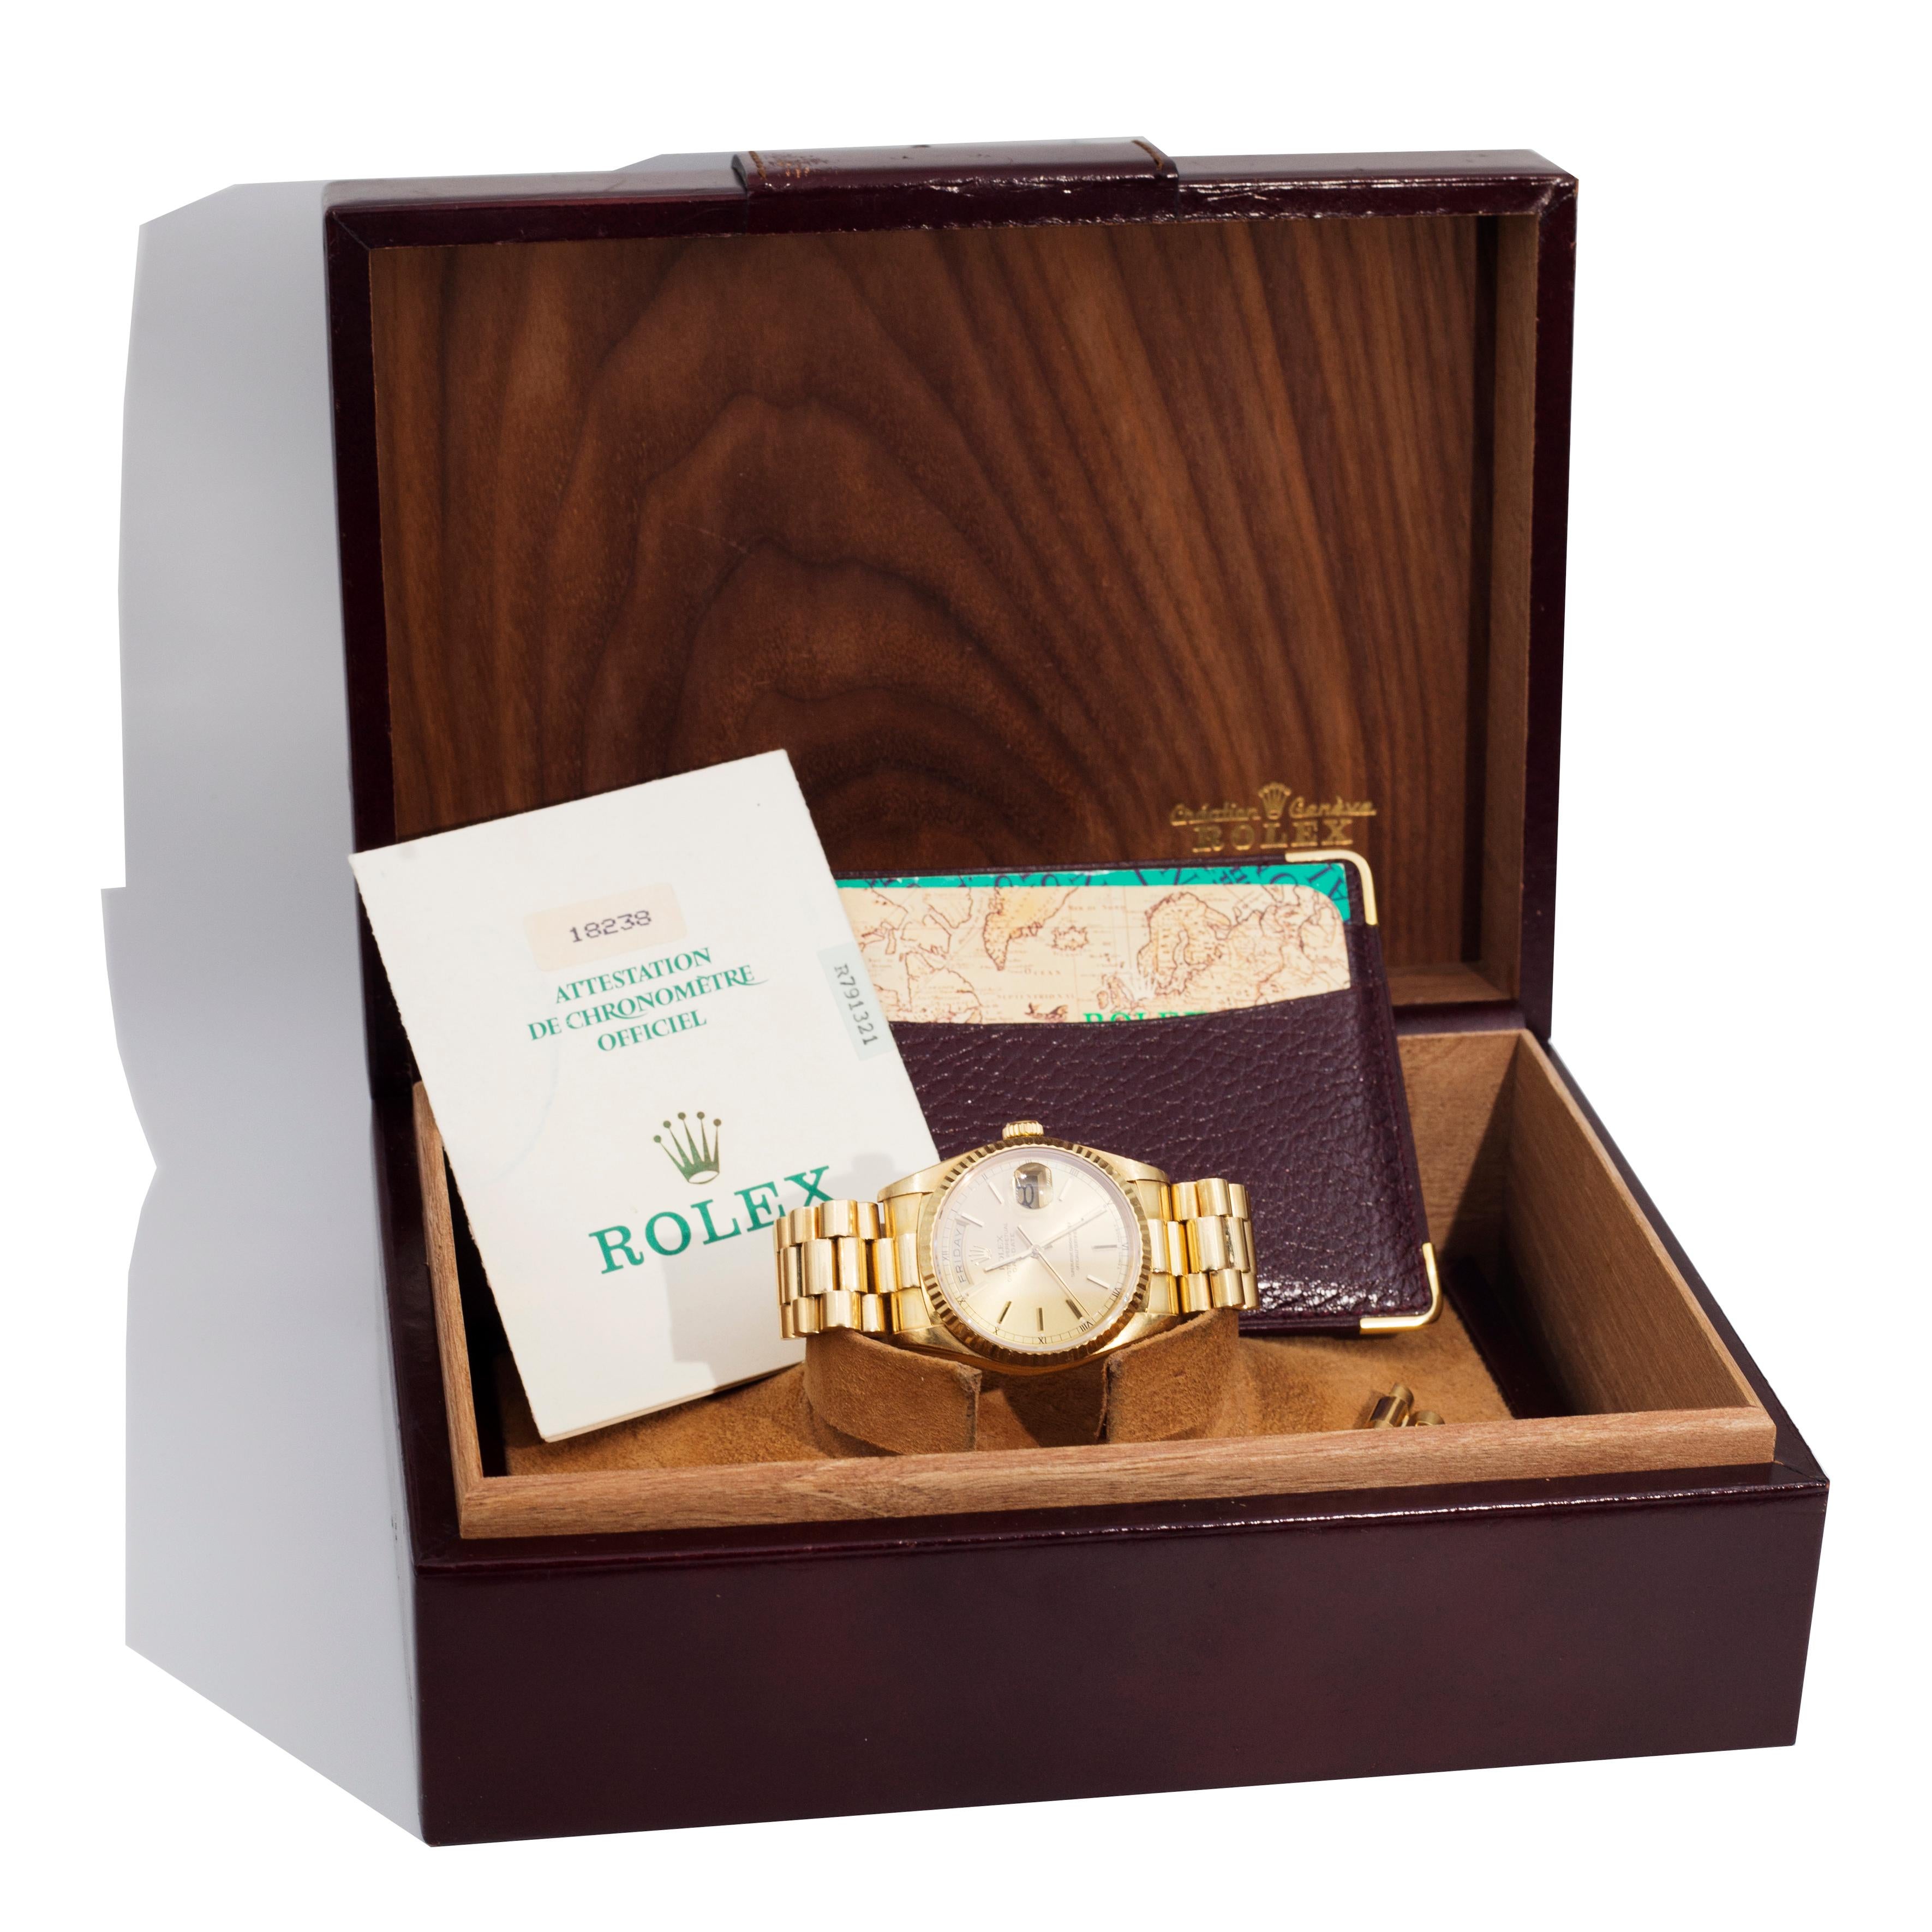 Rolex President Day-Date Model 18238 Solid 18 Carat Gold Watch with Box Papers 2